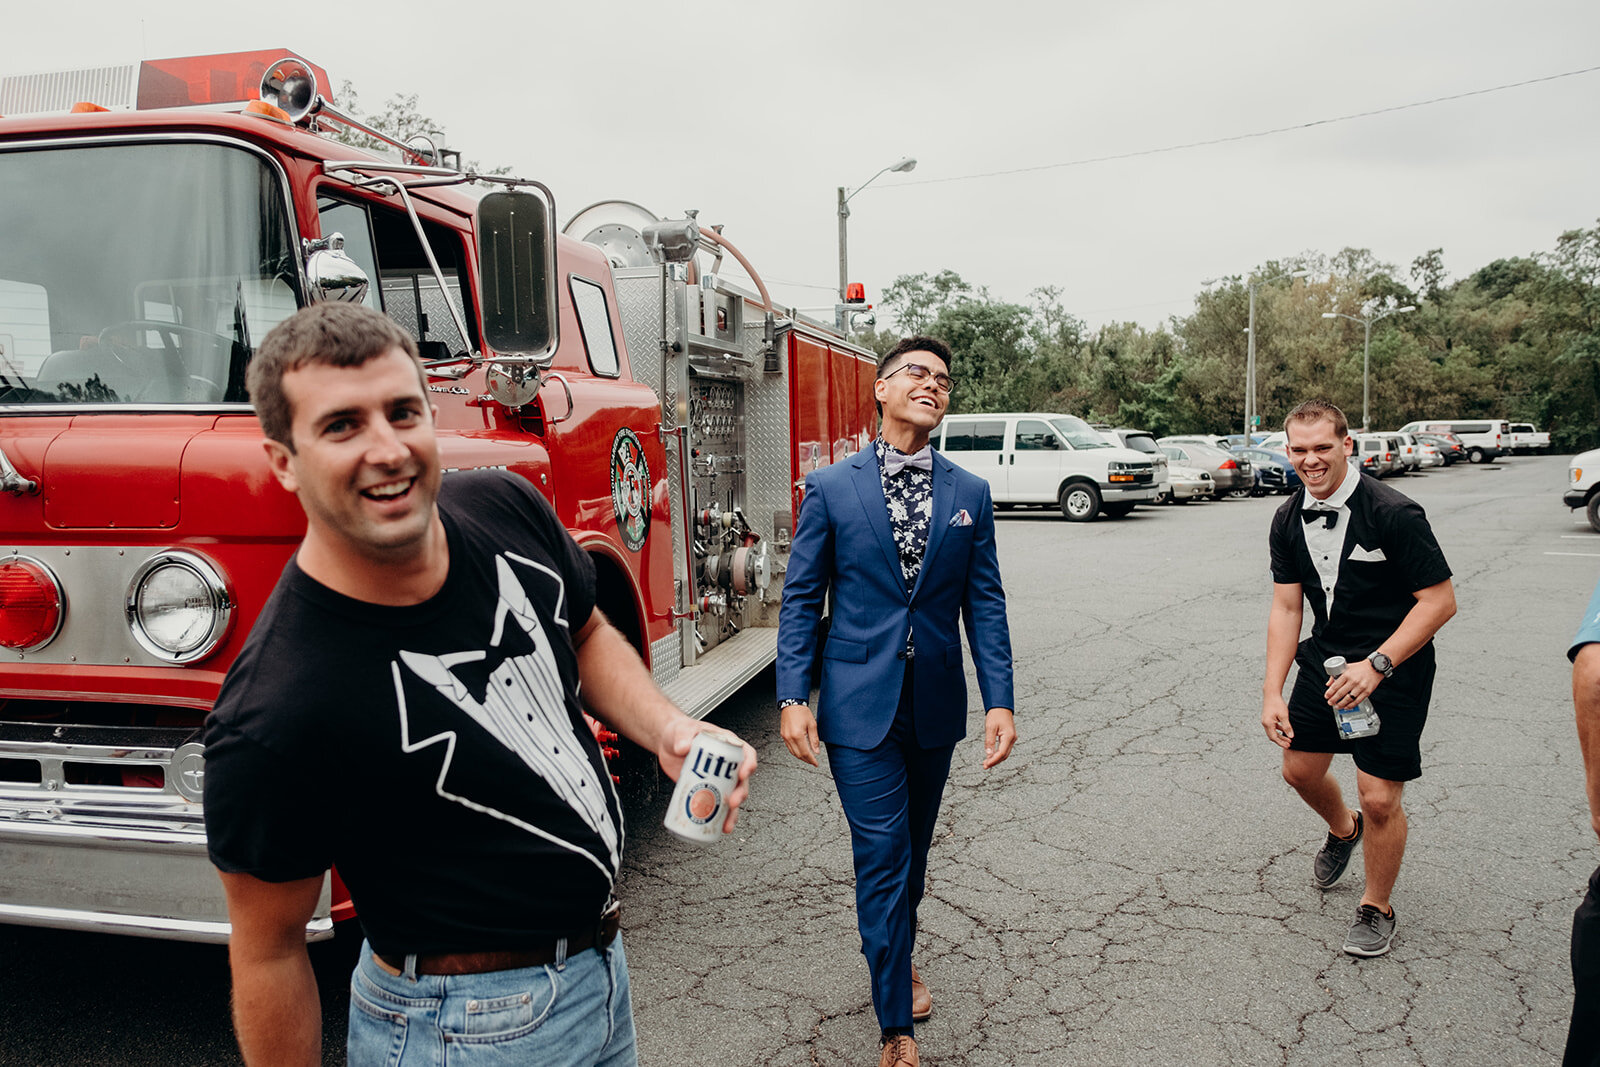 A groom and two of his friends prepare to ride a fire truck into an outdoor wedding ceremony. 